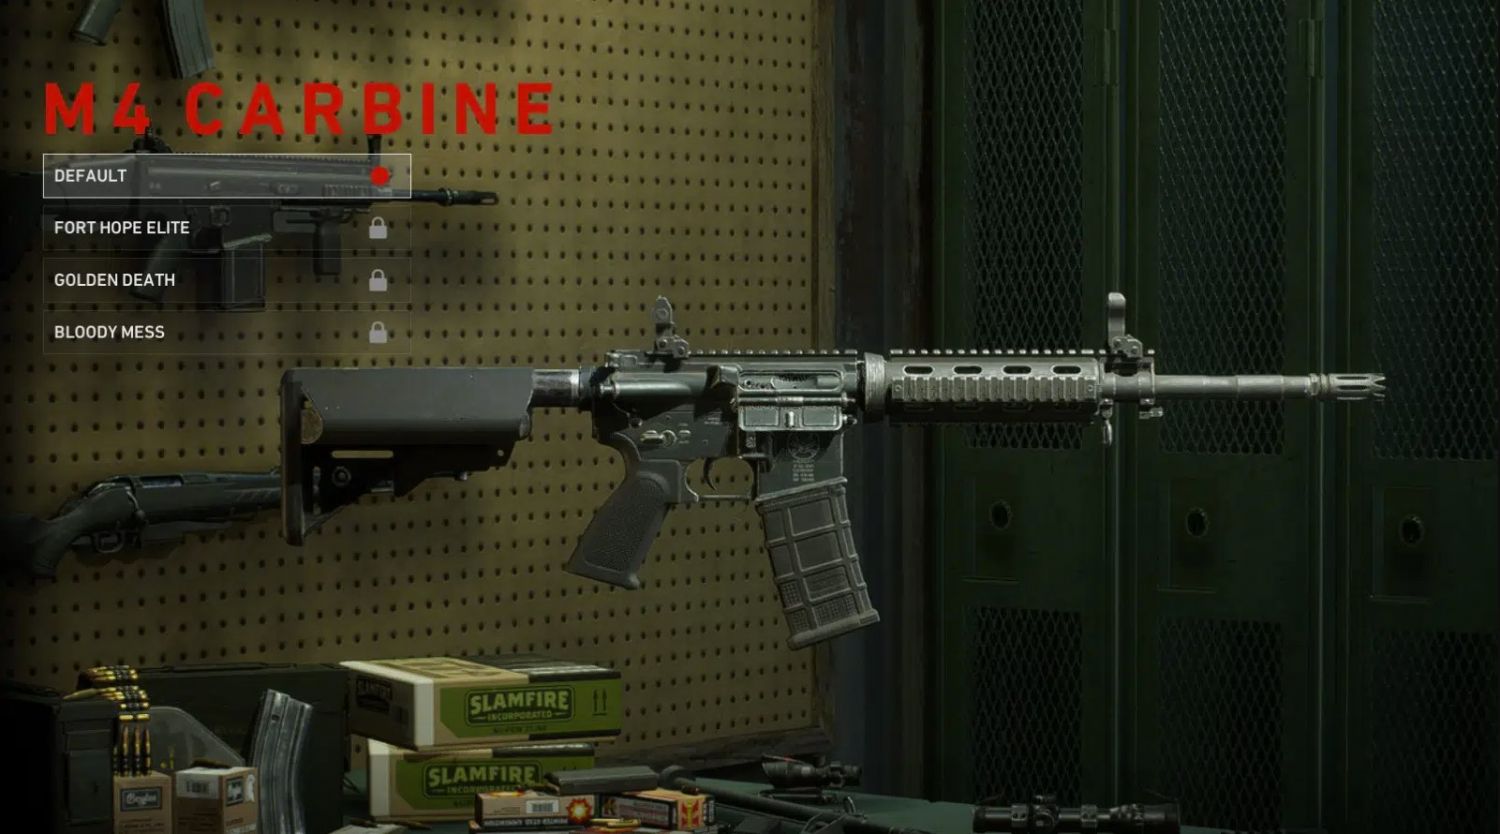 Back 4 Blood – Best Weapons Guide - M4 Carbine